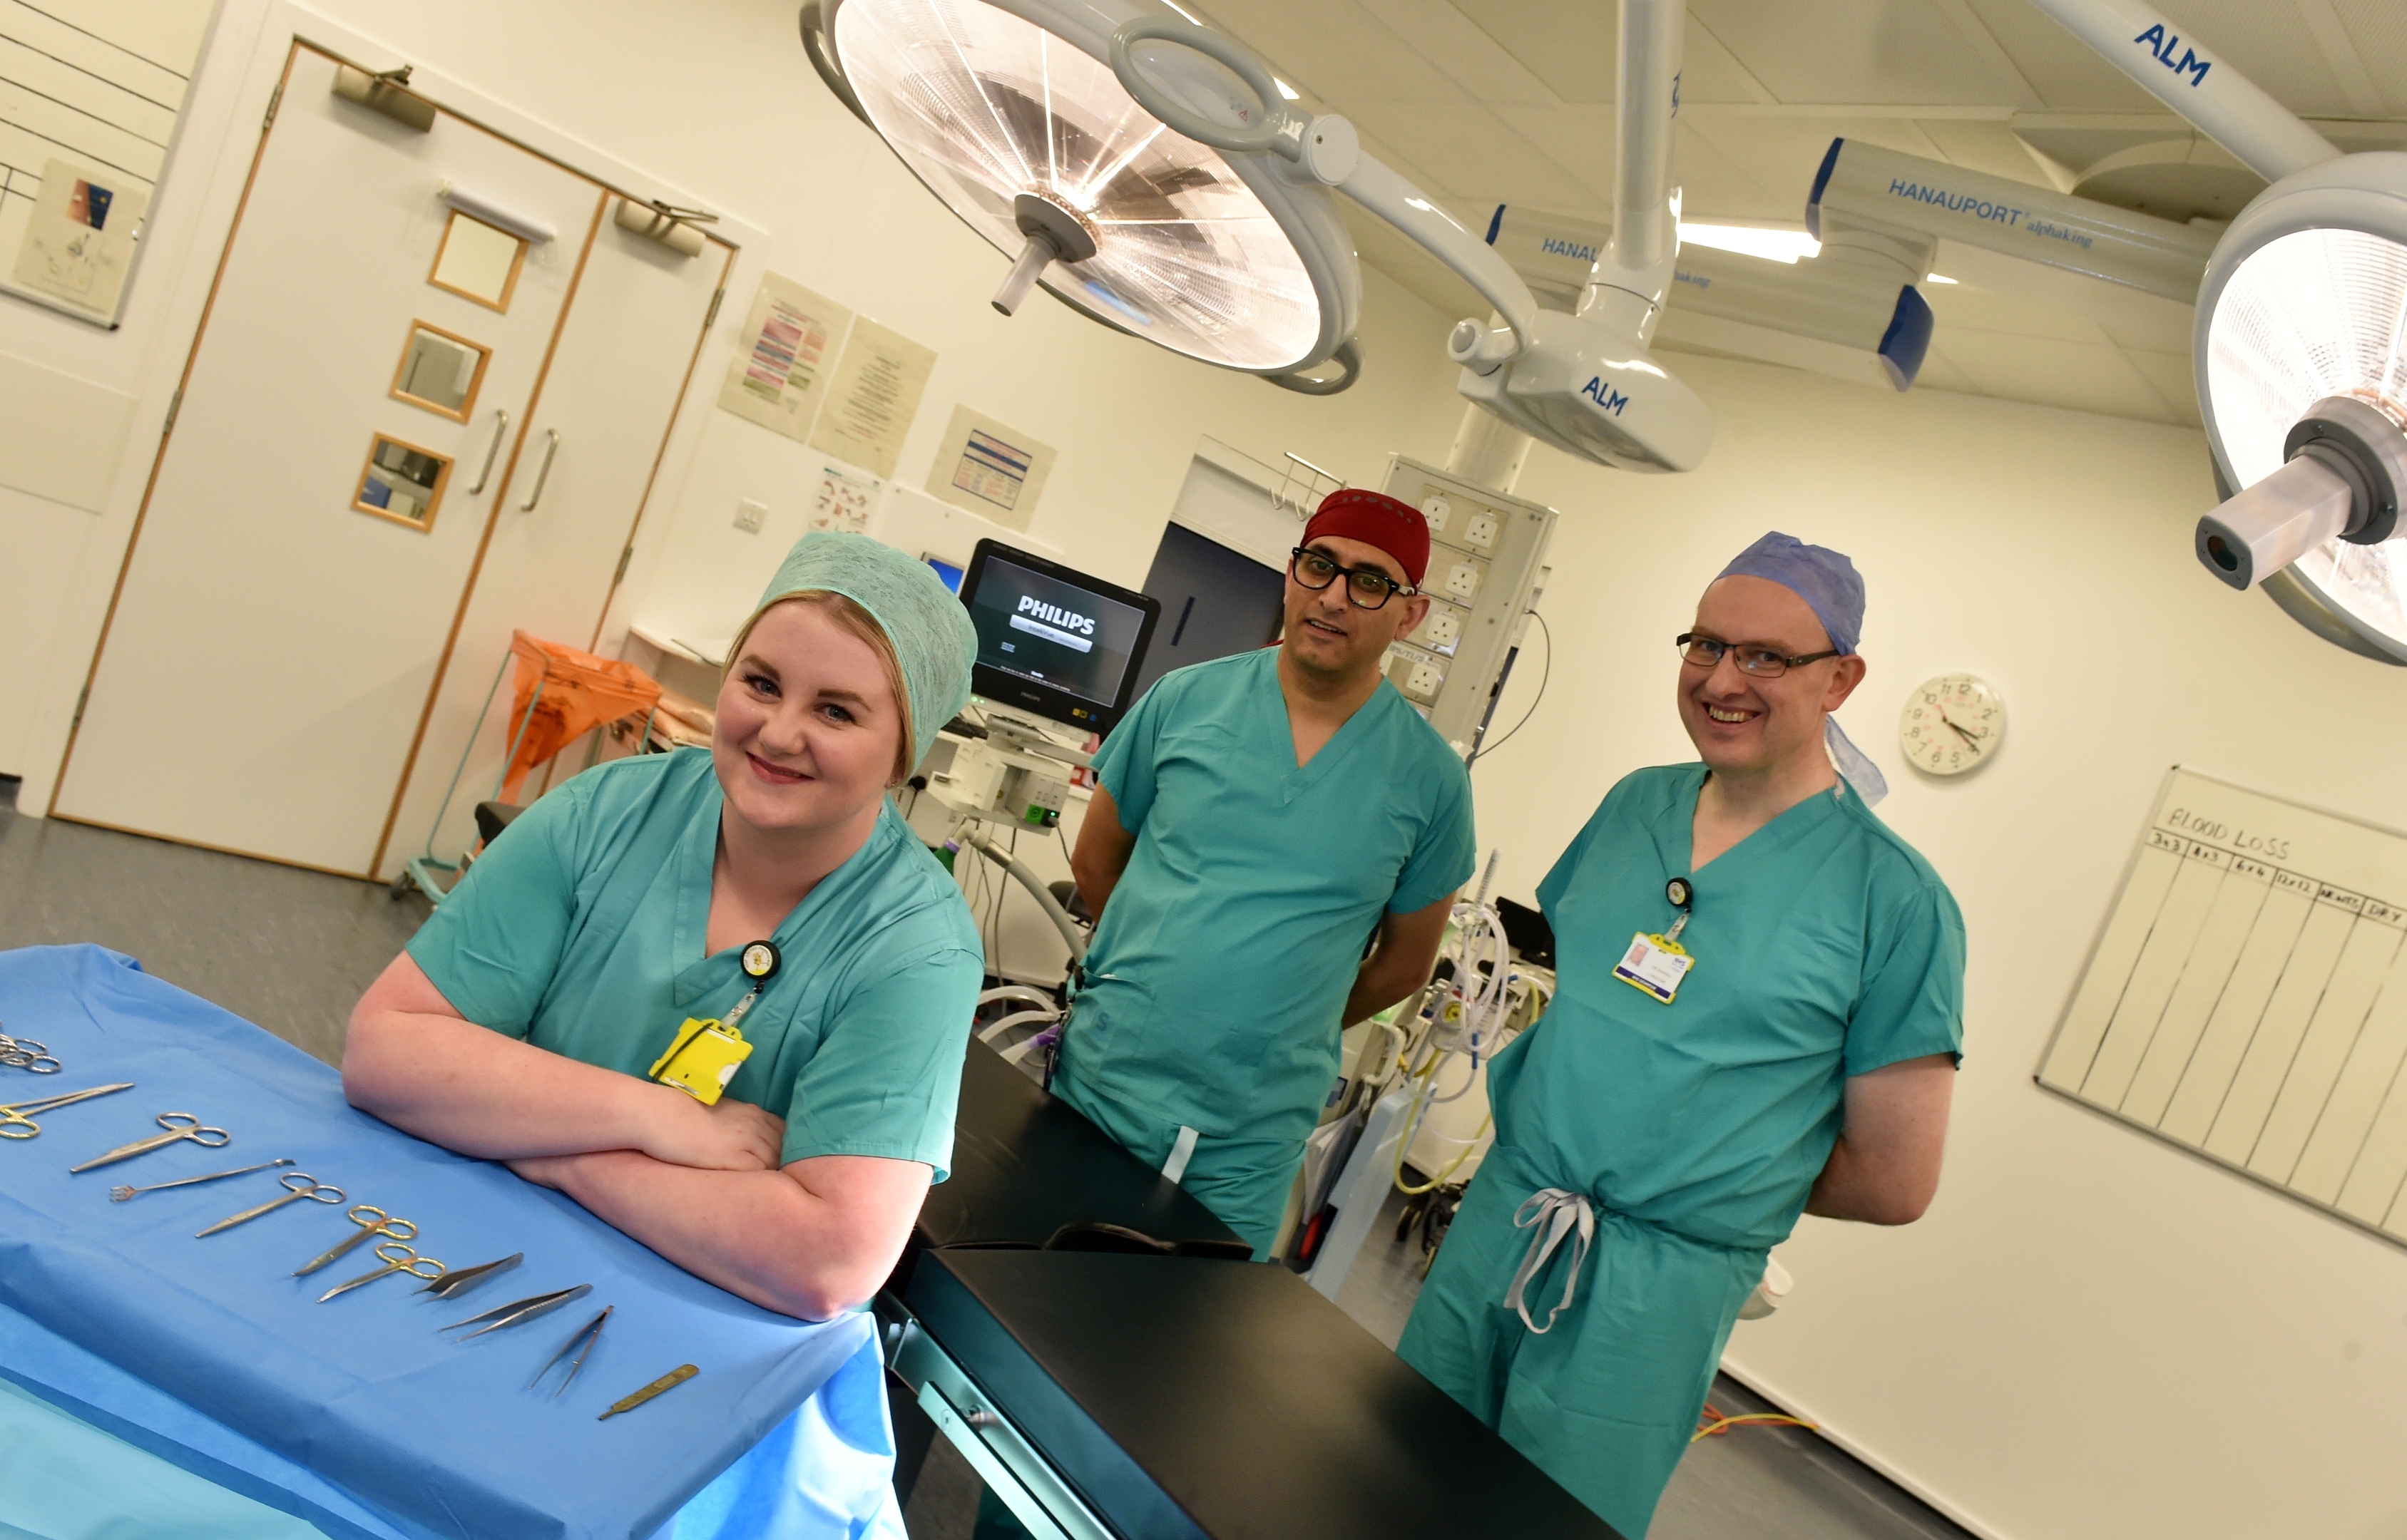 ARCHIE funding has helped Katie Anderson become the first ever Paediatric Theatre Staff Nurse in Scotland, She is pictured with Mr Yatin Patel, Paediatric General Surgeon (left) and Mr Tim Dughall, Paediatric Orthopaedic Surgeon.
Picture by Colin Rennie.